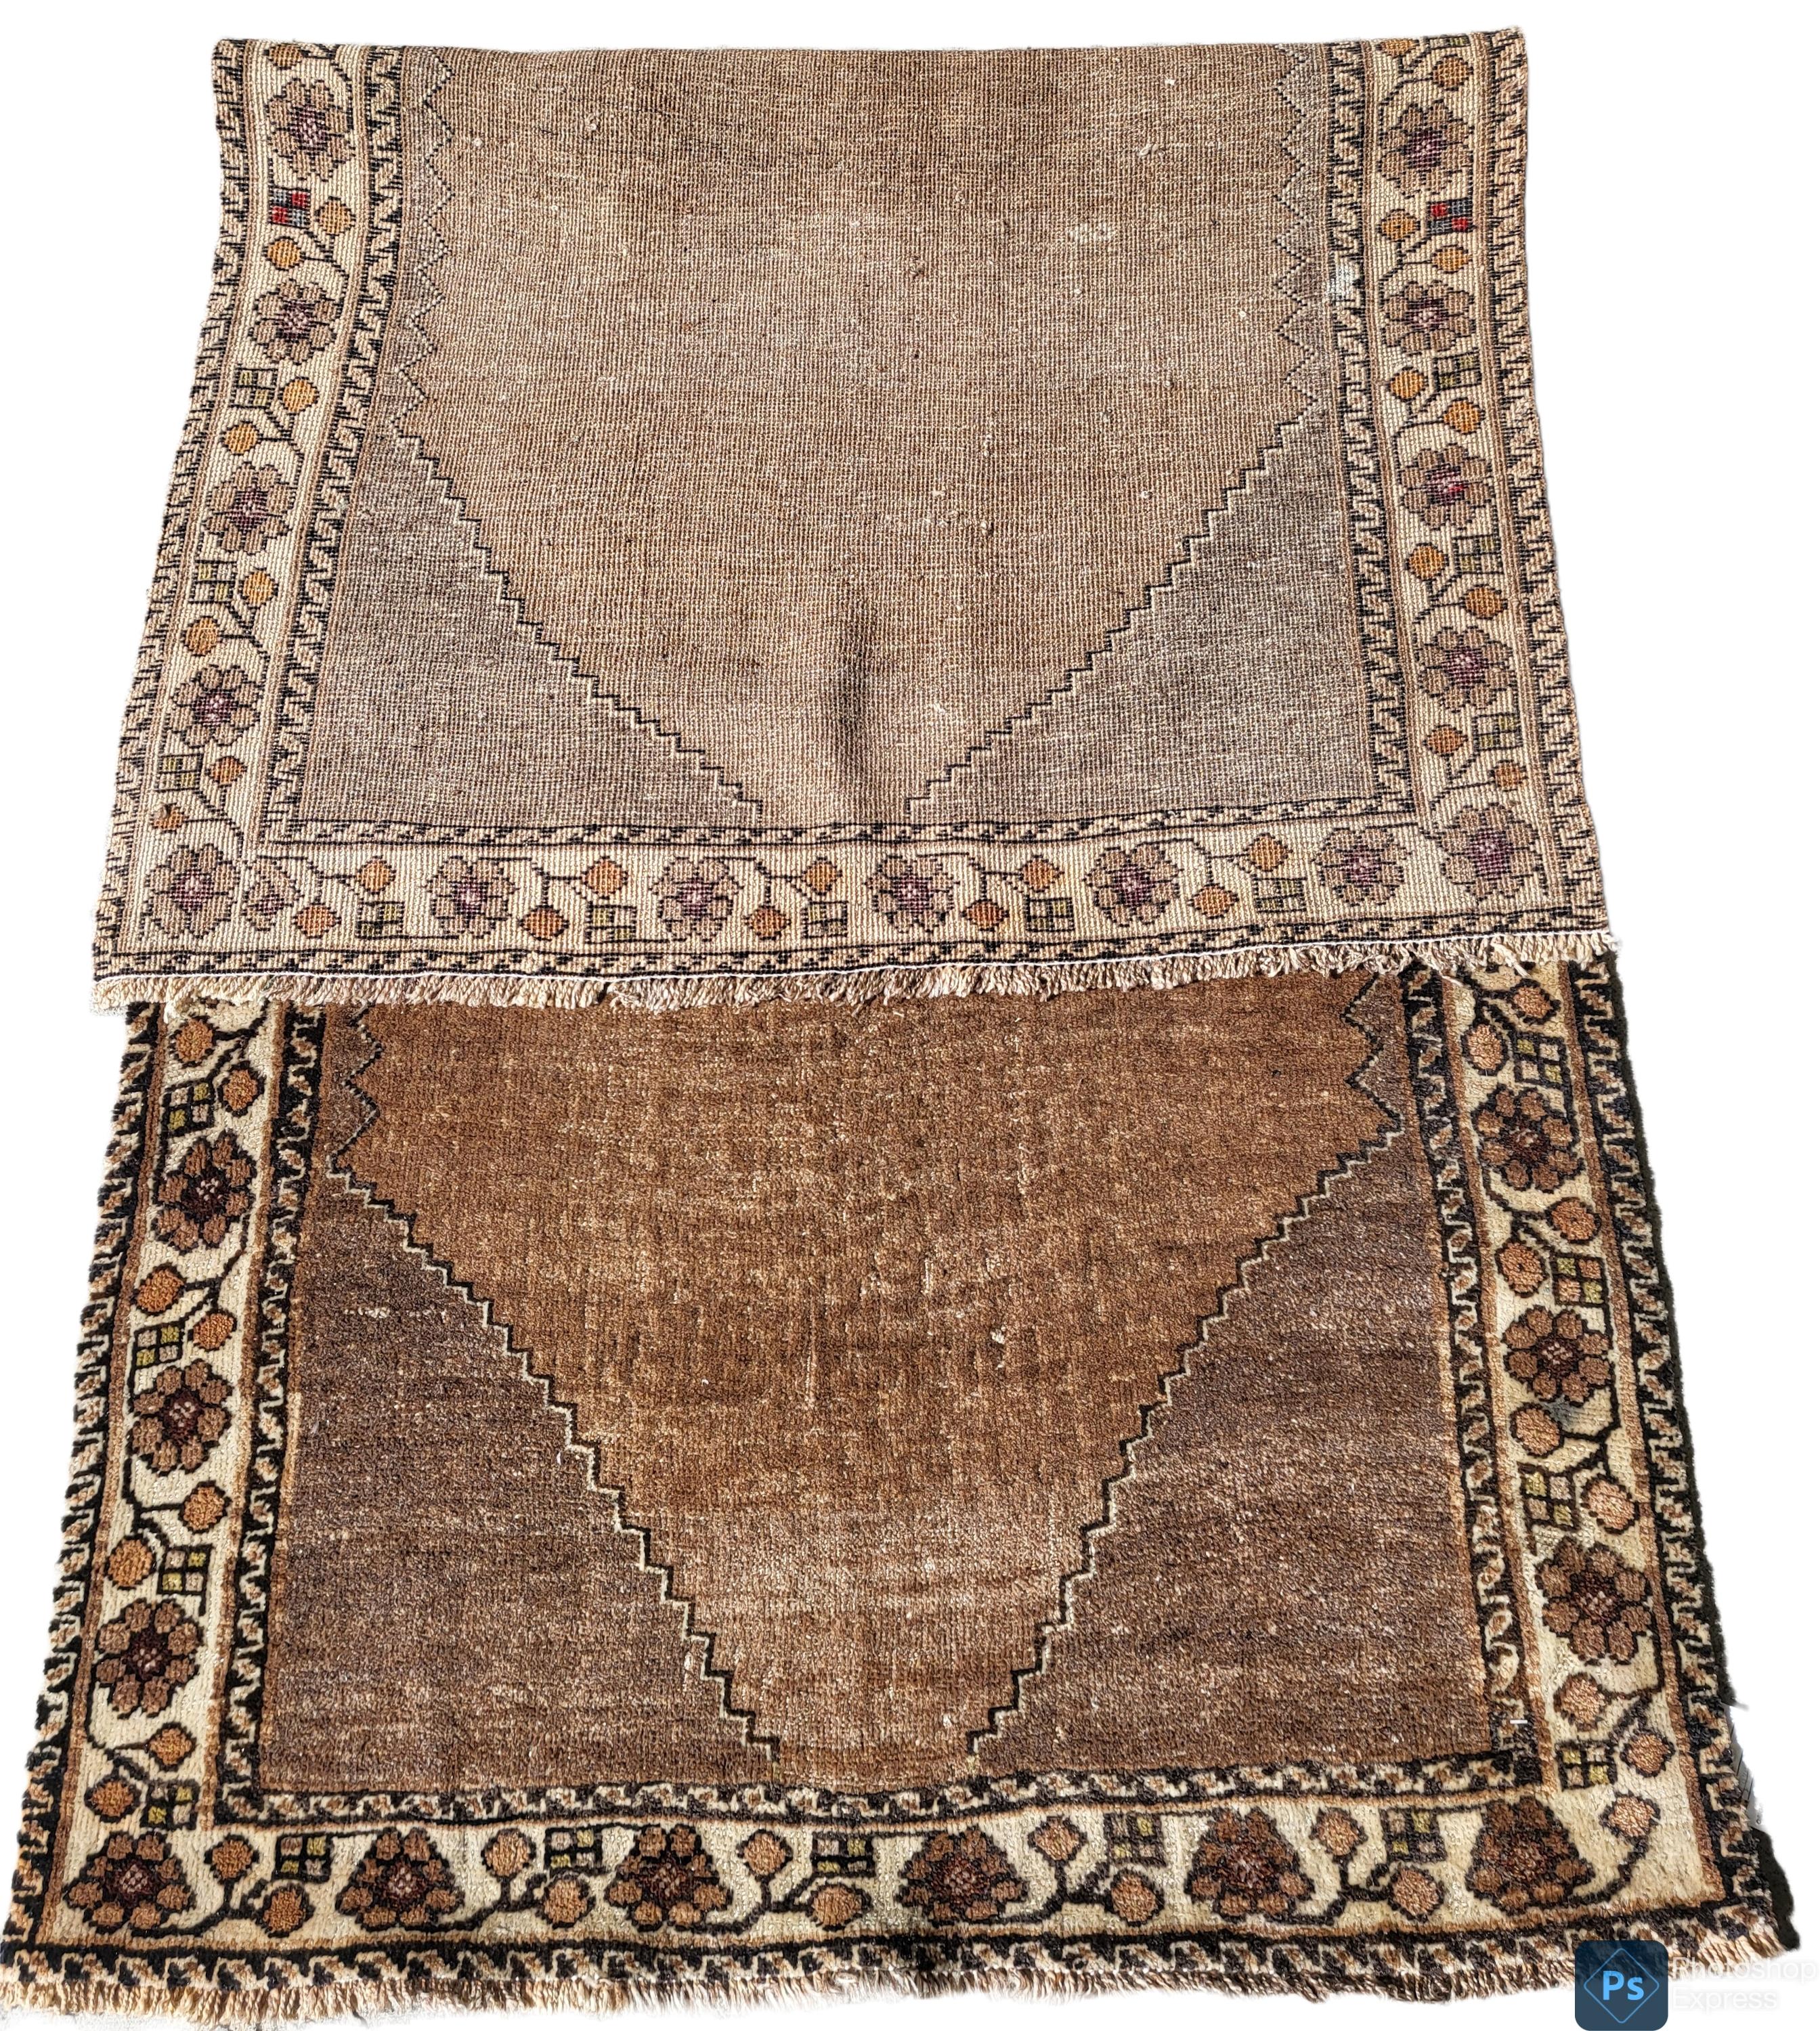 Unique 100 + Year Old Kashkooli Gabbeh

8ft x 3.5ft

Enchanting old pictorial Gabbeh rug, handcrafted by masterful Kashkoolis of the Qashqais. This nomadic treasure features an unusual horse depictation unique to the Nomad who wove it.

Comprised